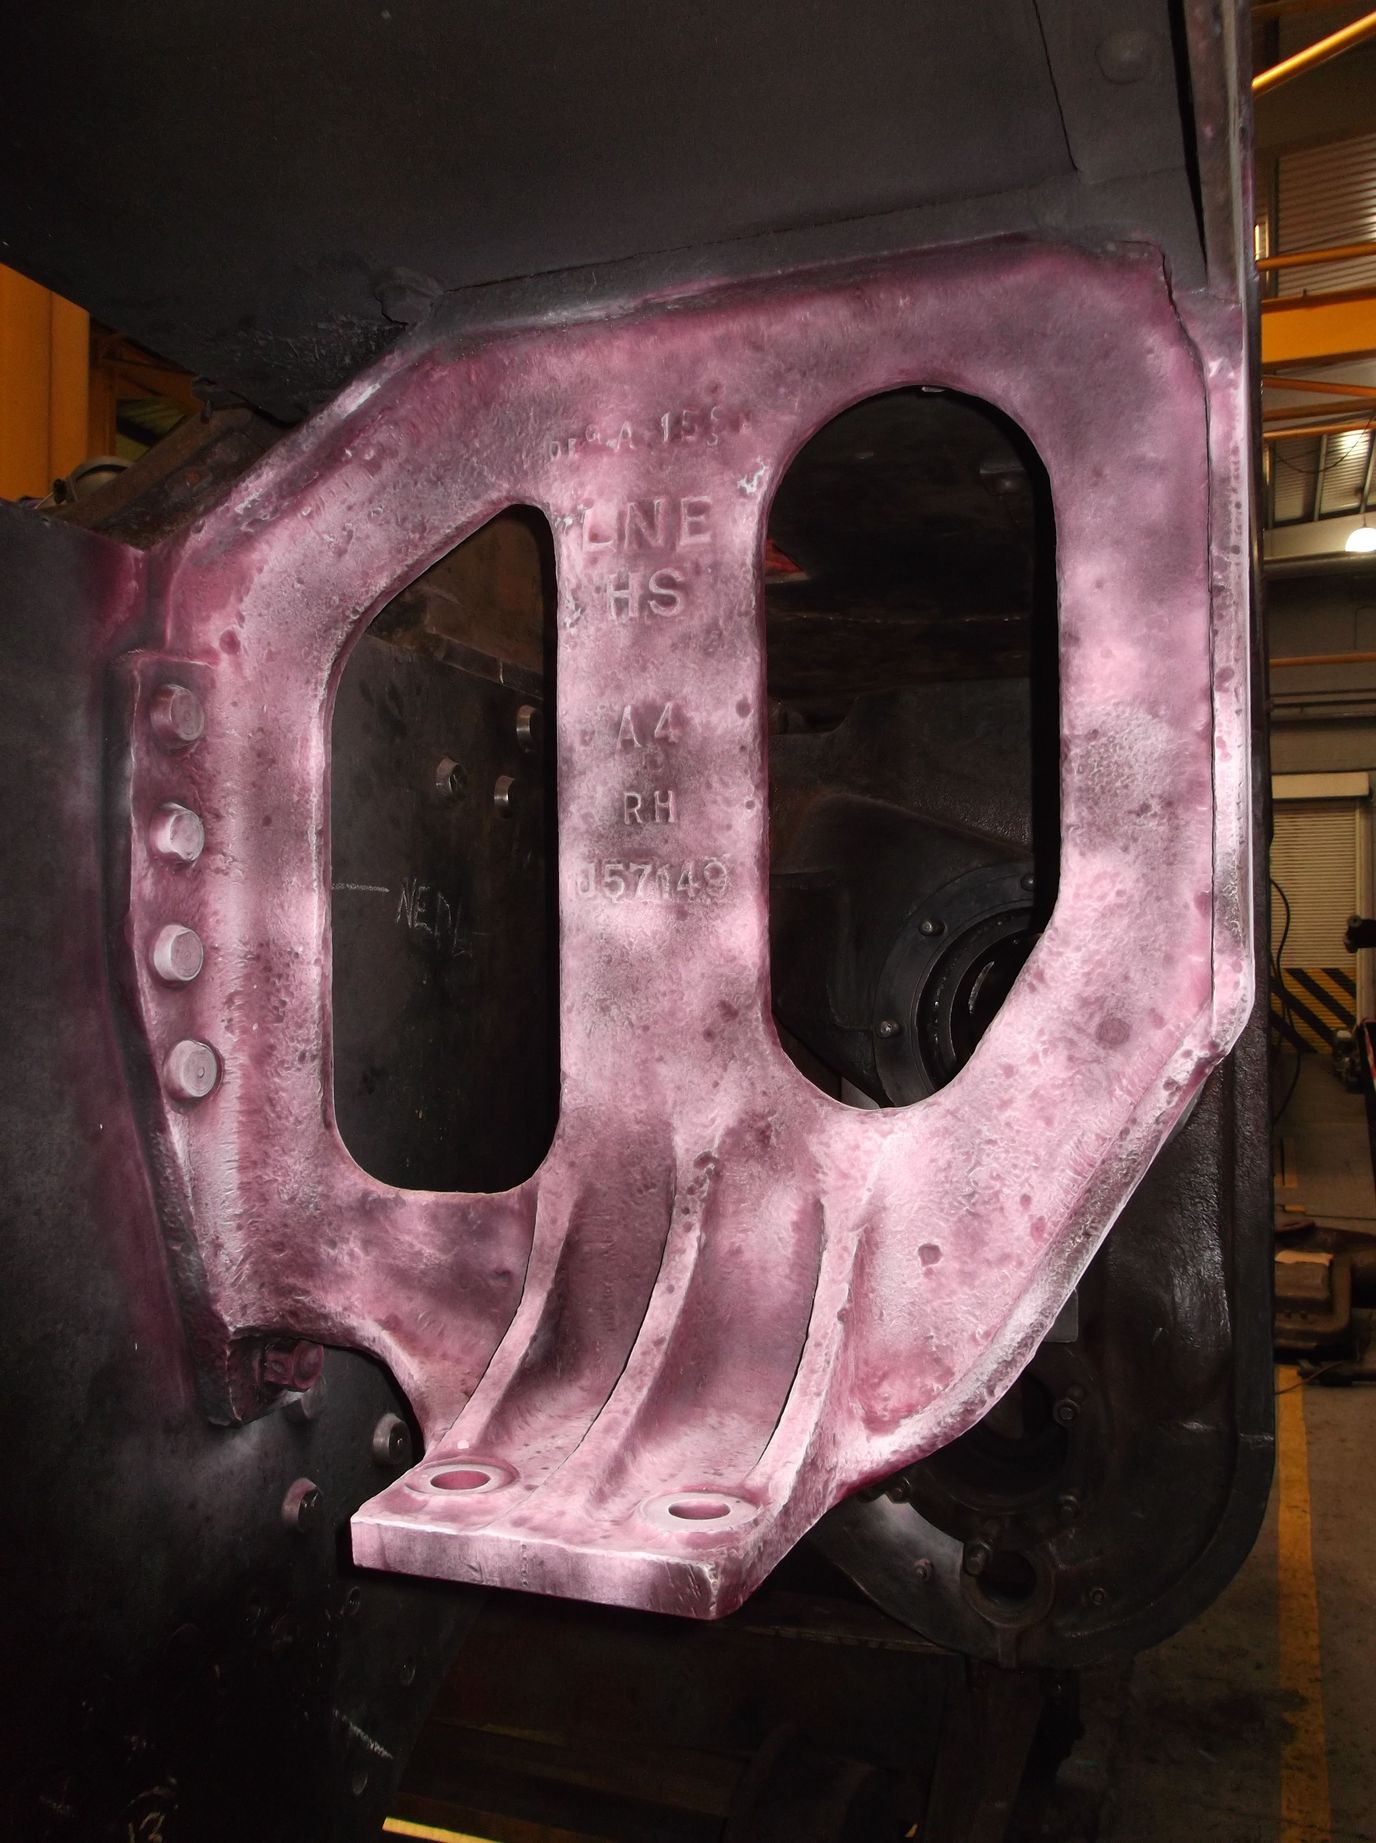 Using dye penetrant fluids on the loco brackets to test for flaws leaves the inspected areas pink. This is the right hand slidebar bracket.